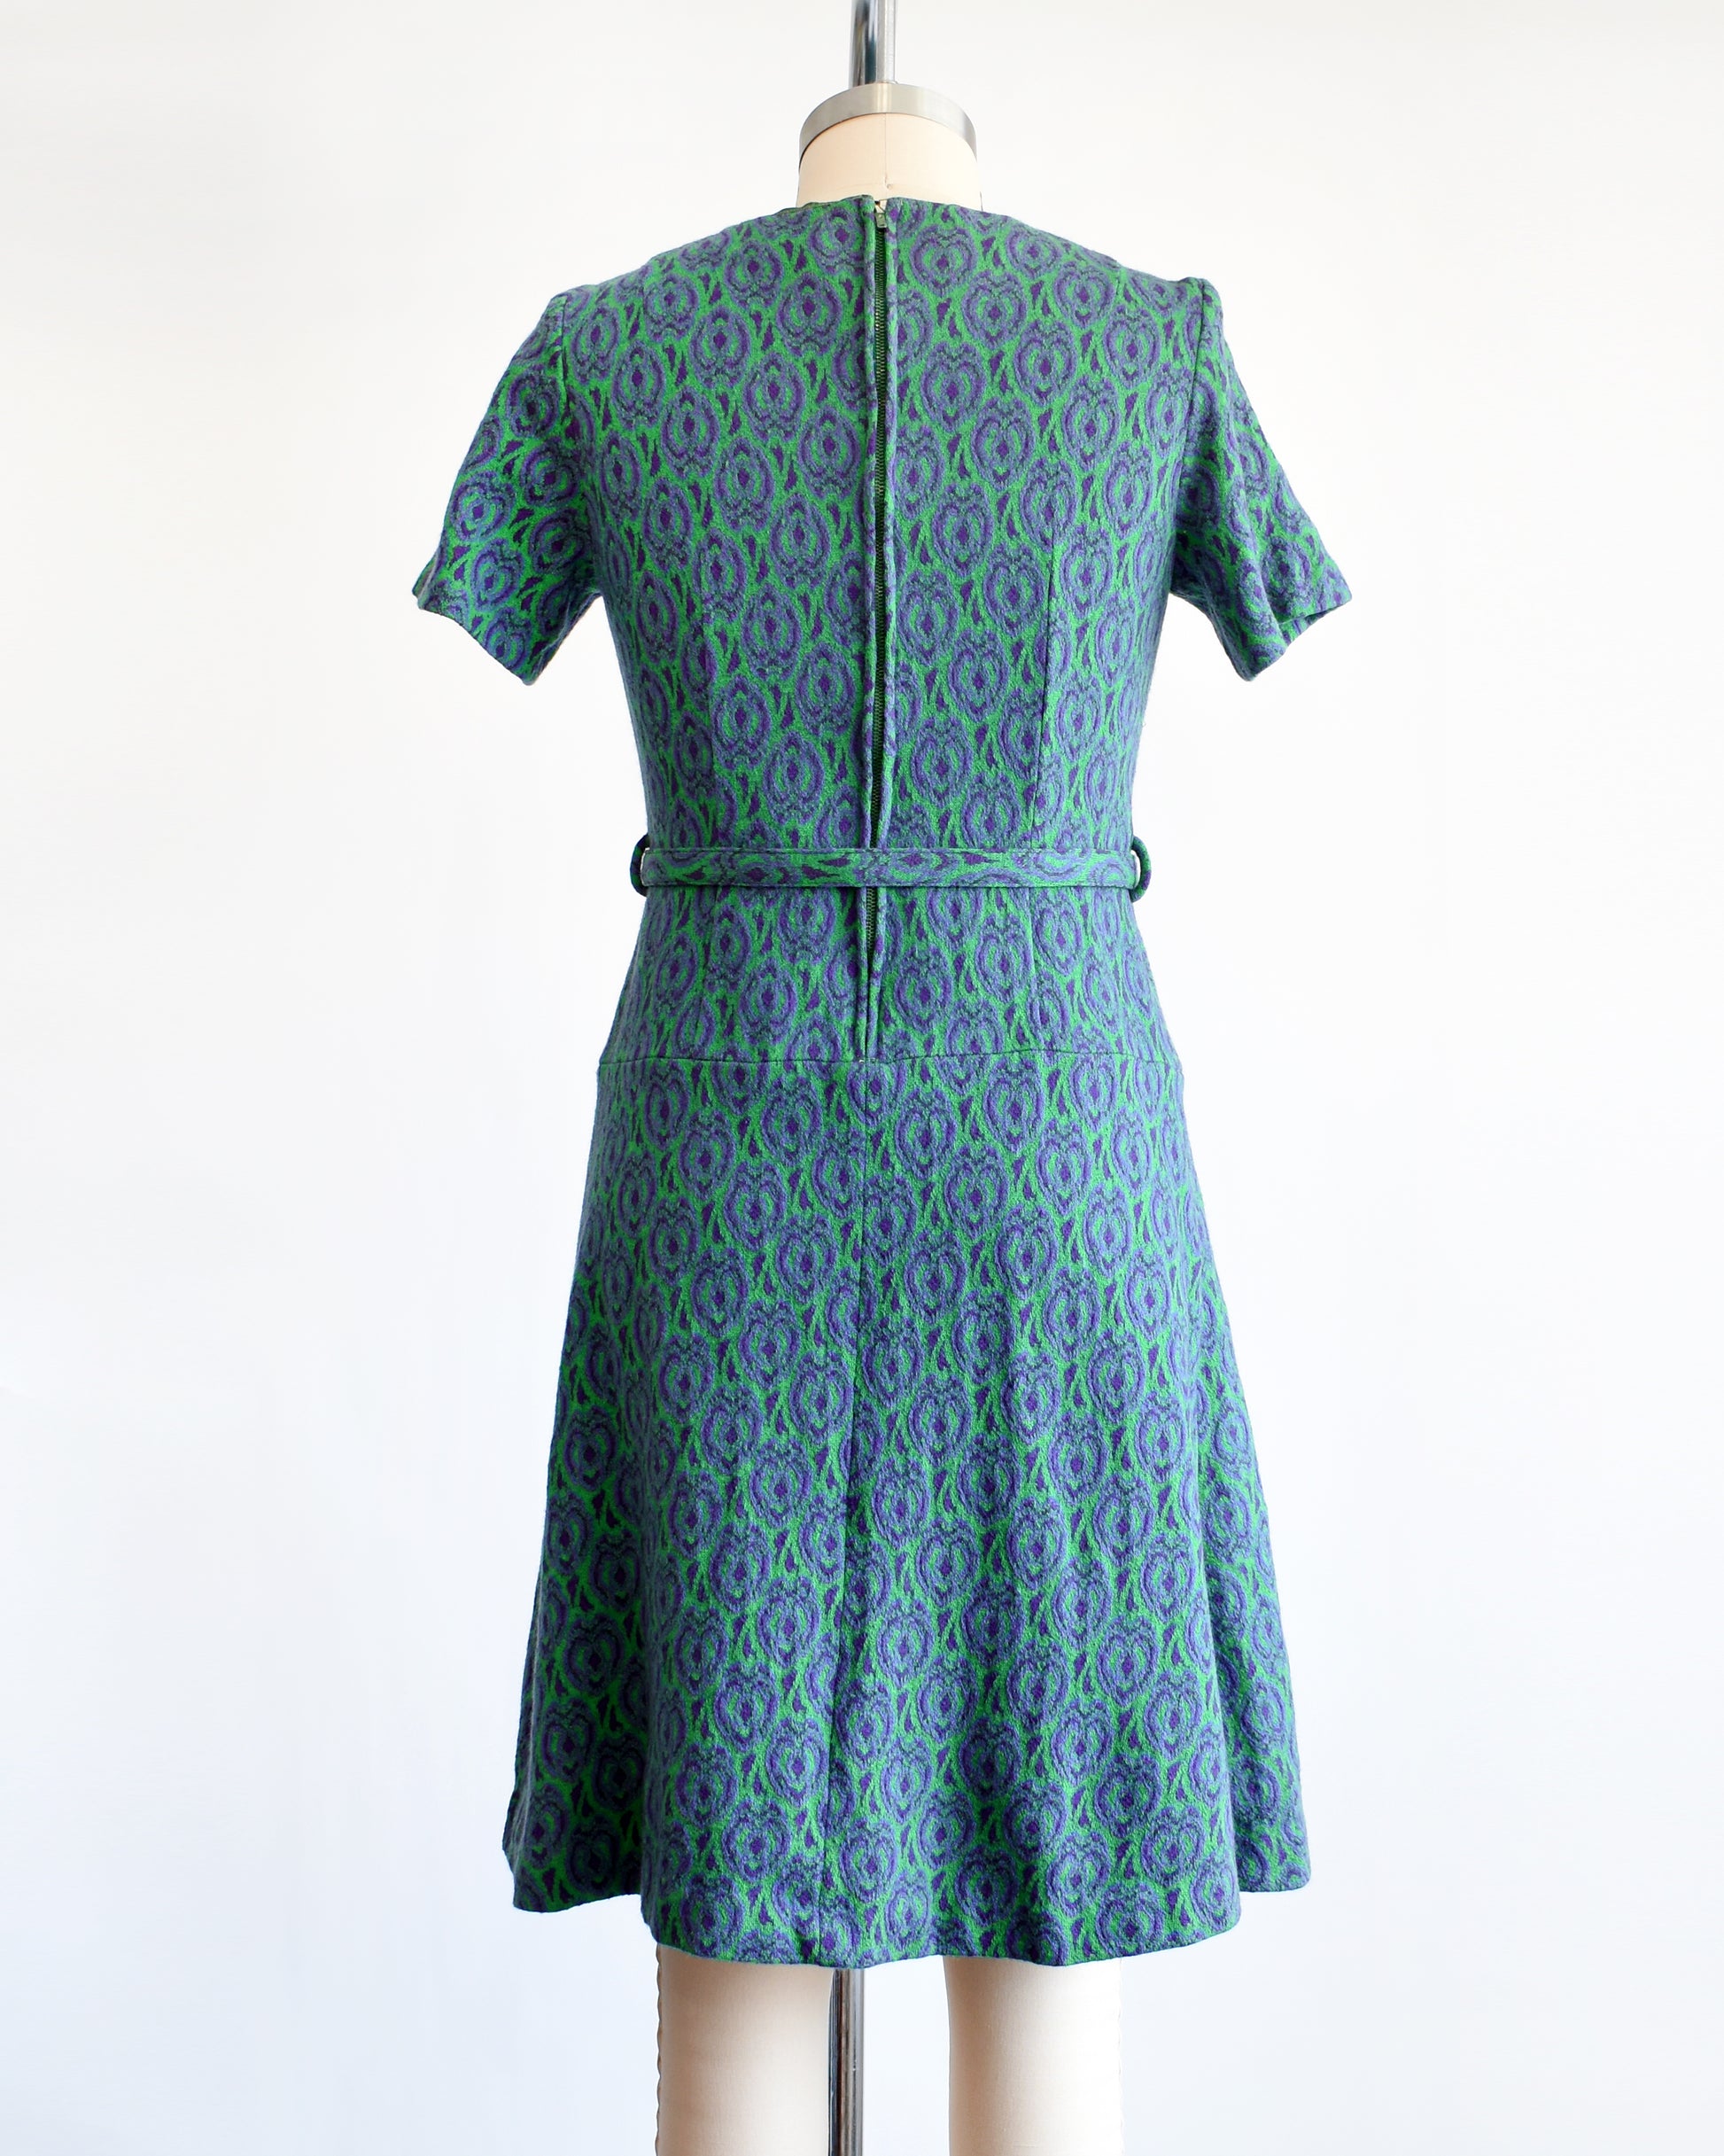 back view of a vintage 1960s green and purple drop waist dress and matching belt